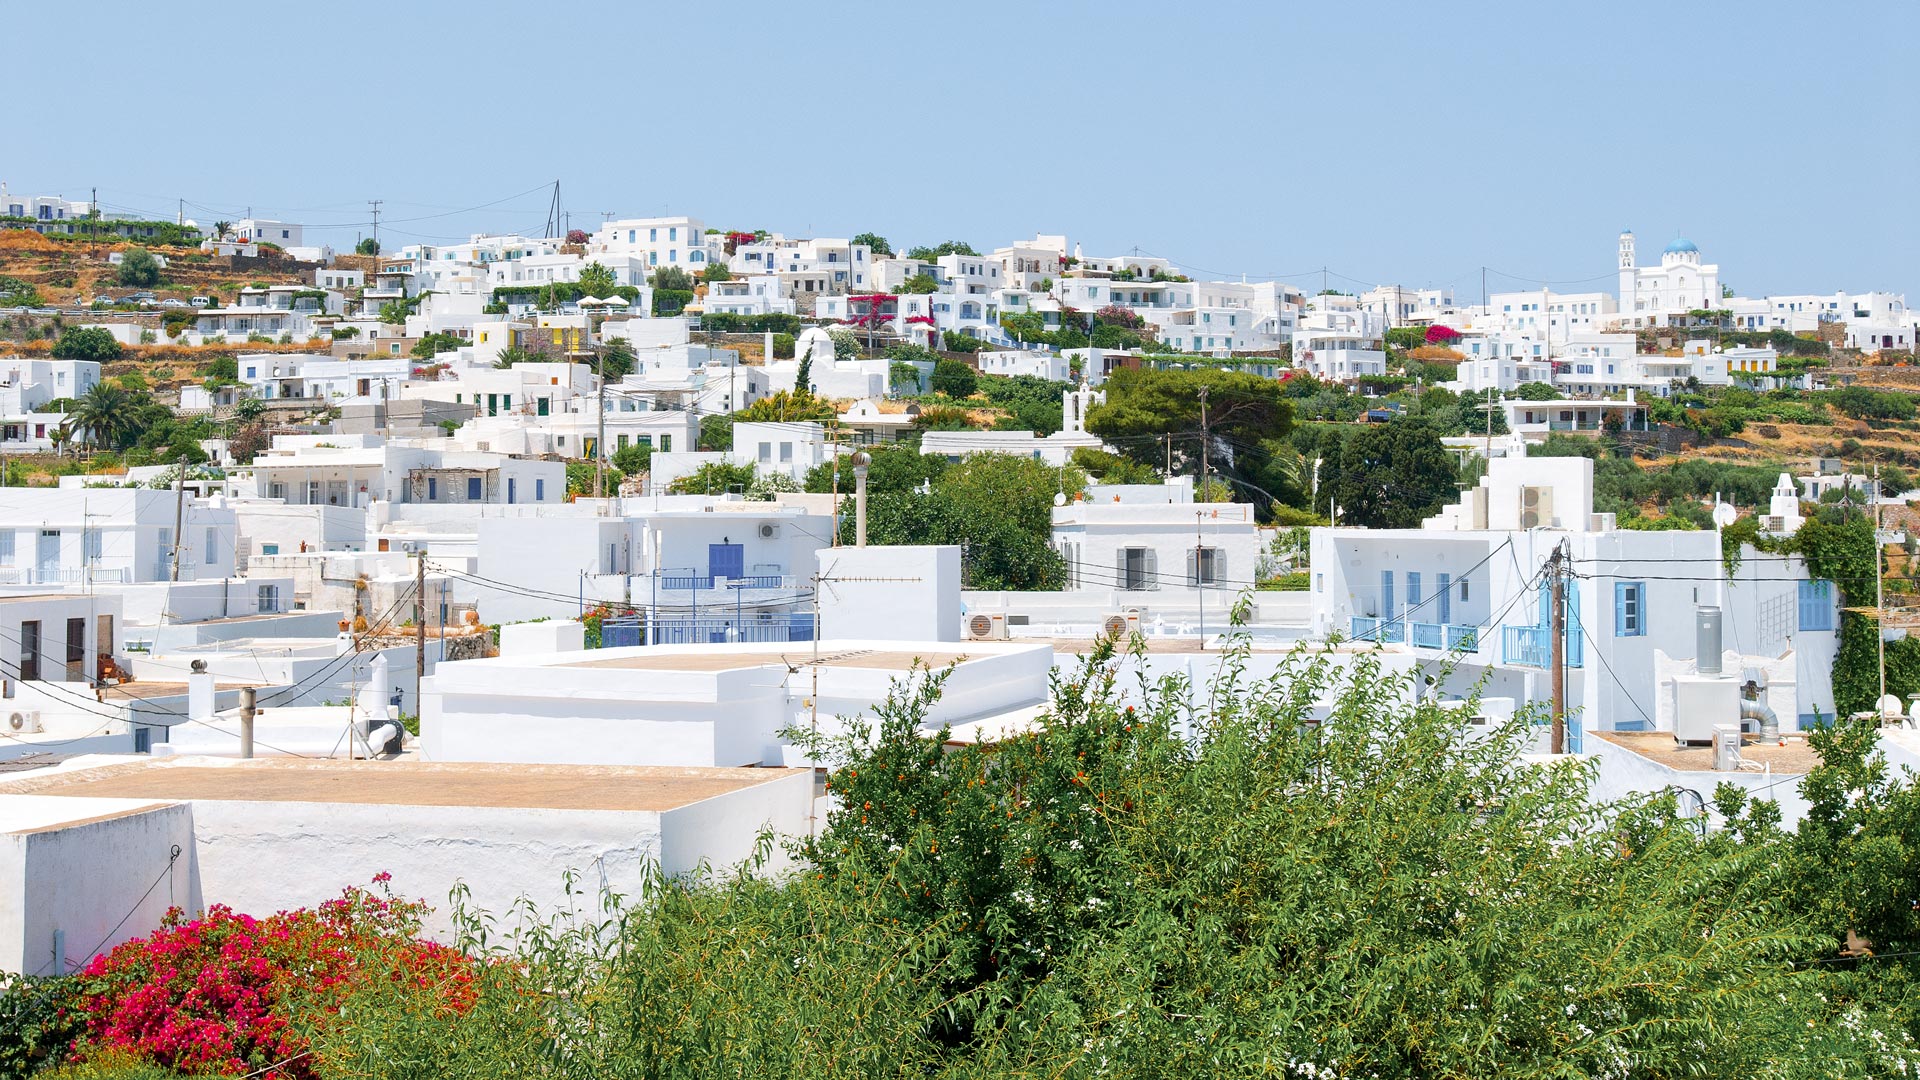 There’s an authenticity to Apollonia, built on three hillsides in the heart of Sifnos, that’s impossible to fully describe